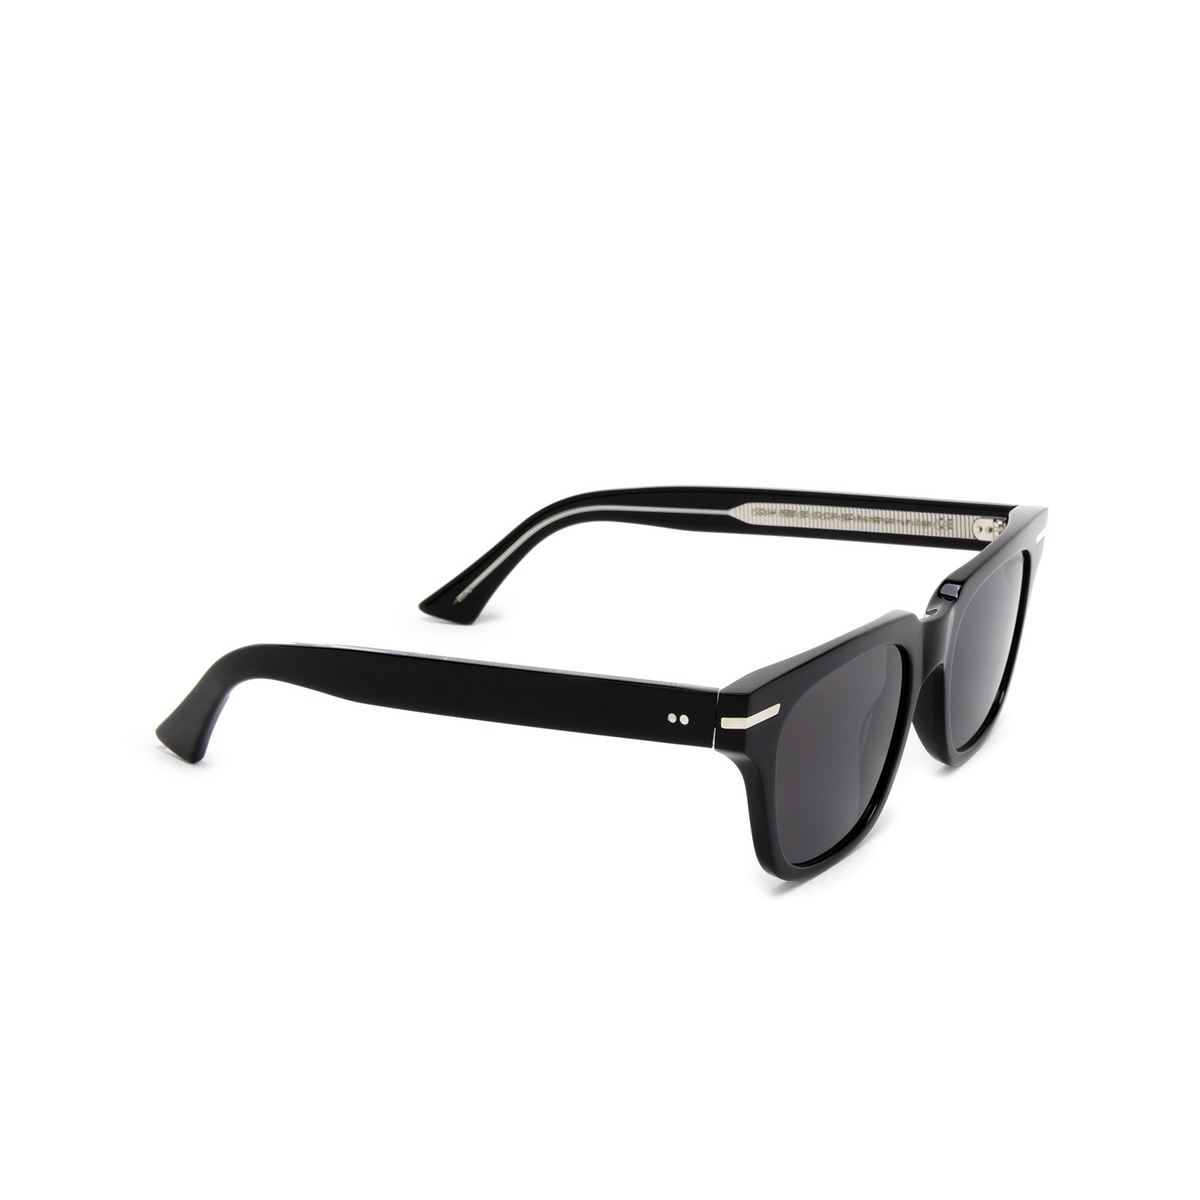 Cutler and Gross 1355 Sunglasses 05 Black Taxi - three-quarters view